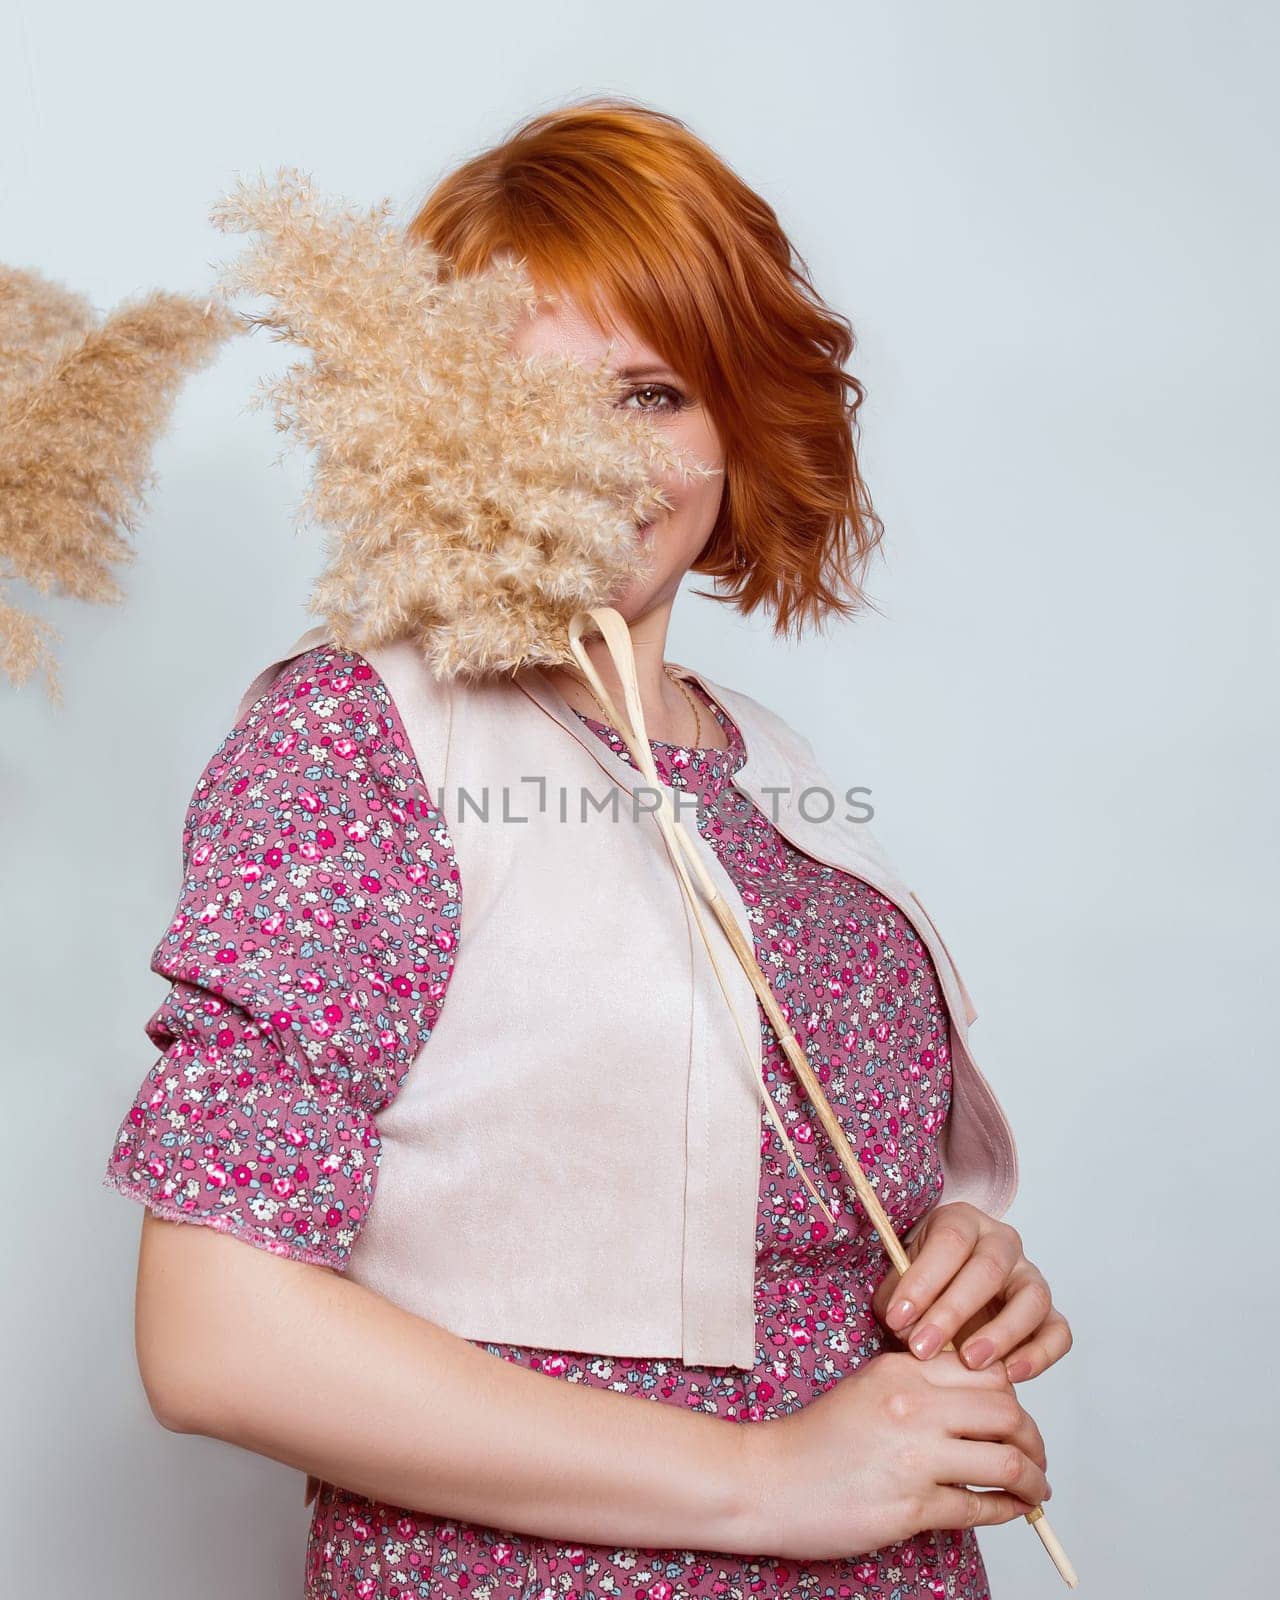 A red-haired woman in a fashionable outfit playfully looks out from behind a reed by ElenaNEL